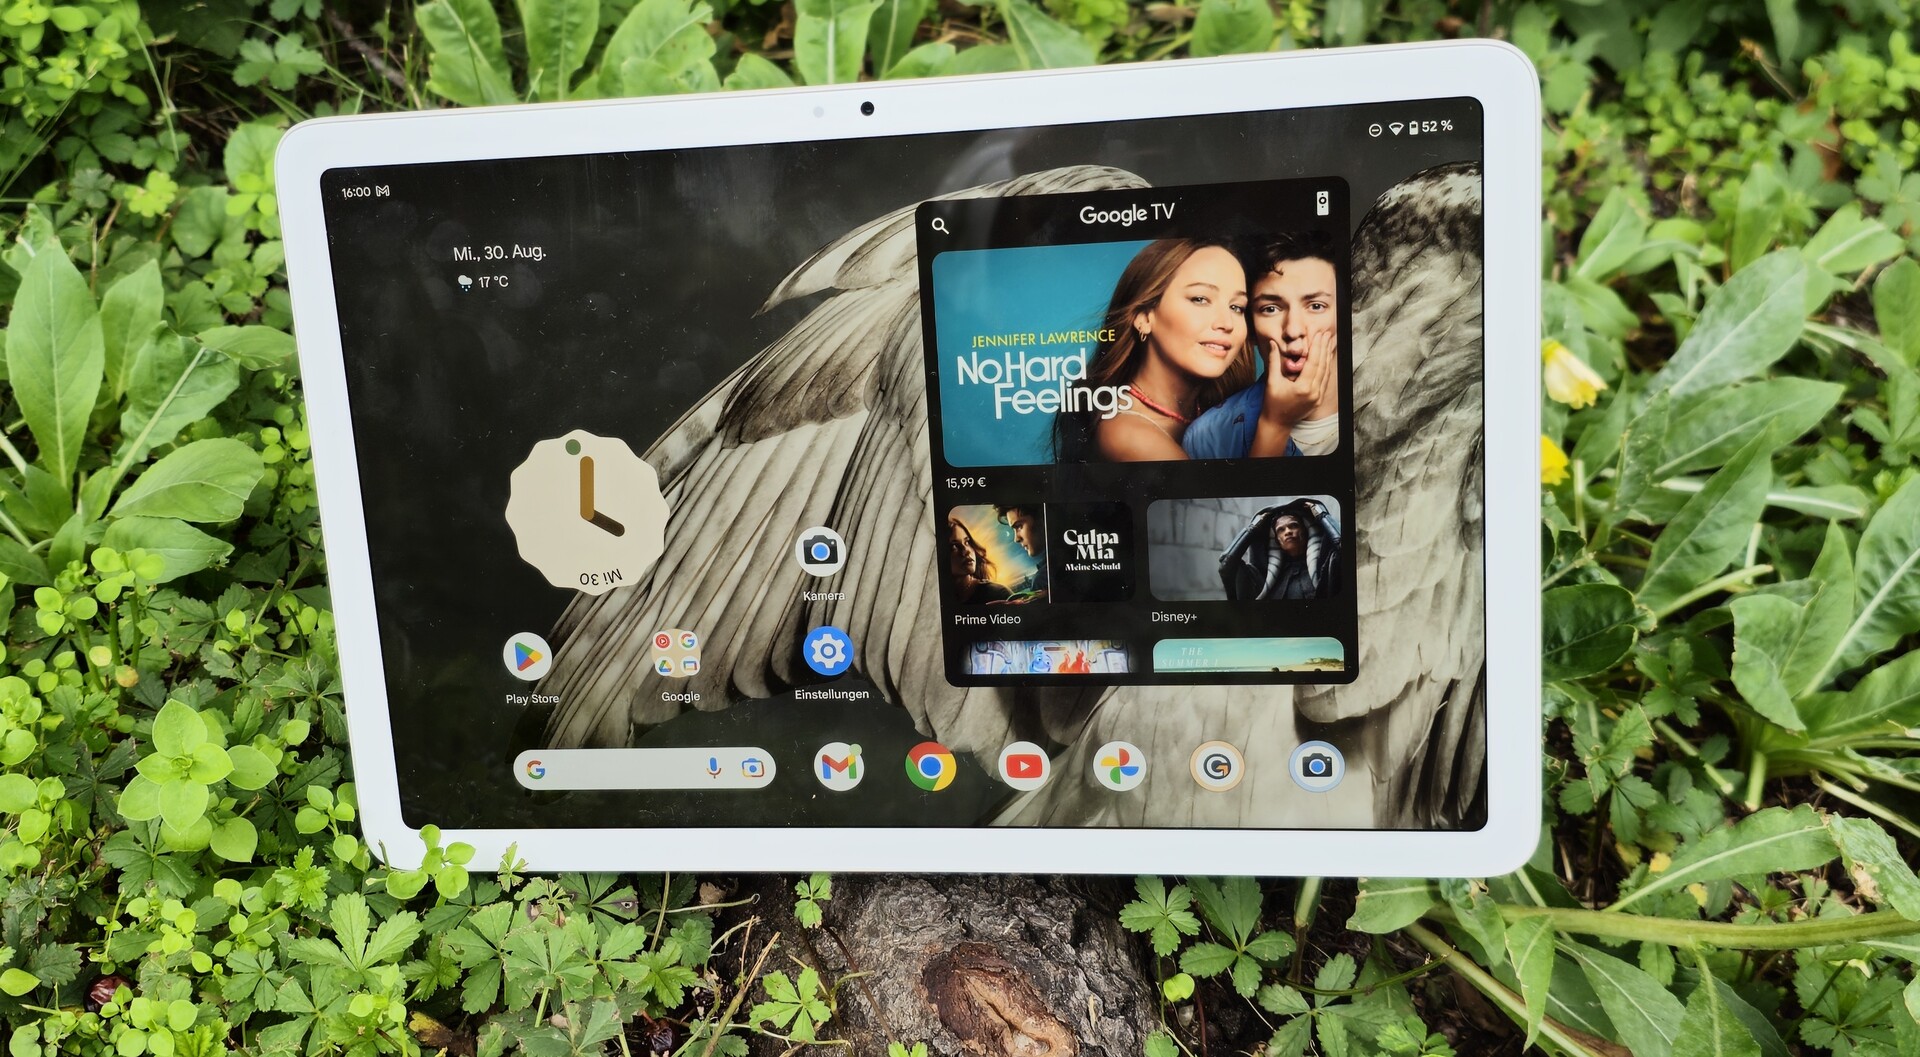 Google Pixel Tablet Review: Not Made To Battle Galaxy Tab Or iPad